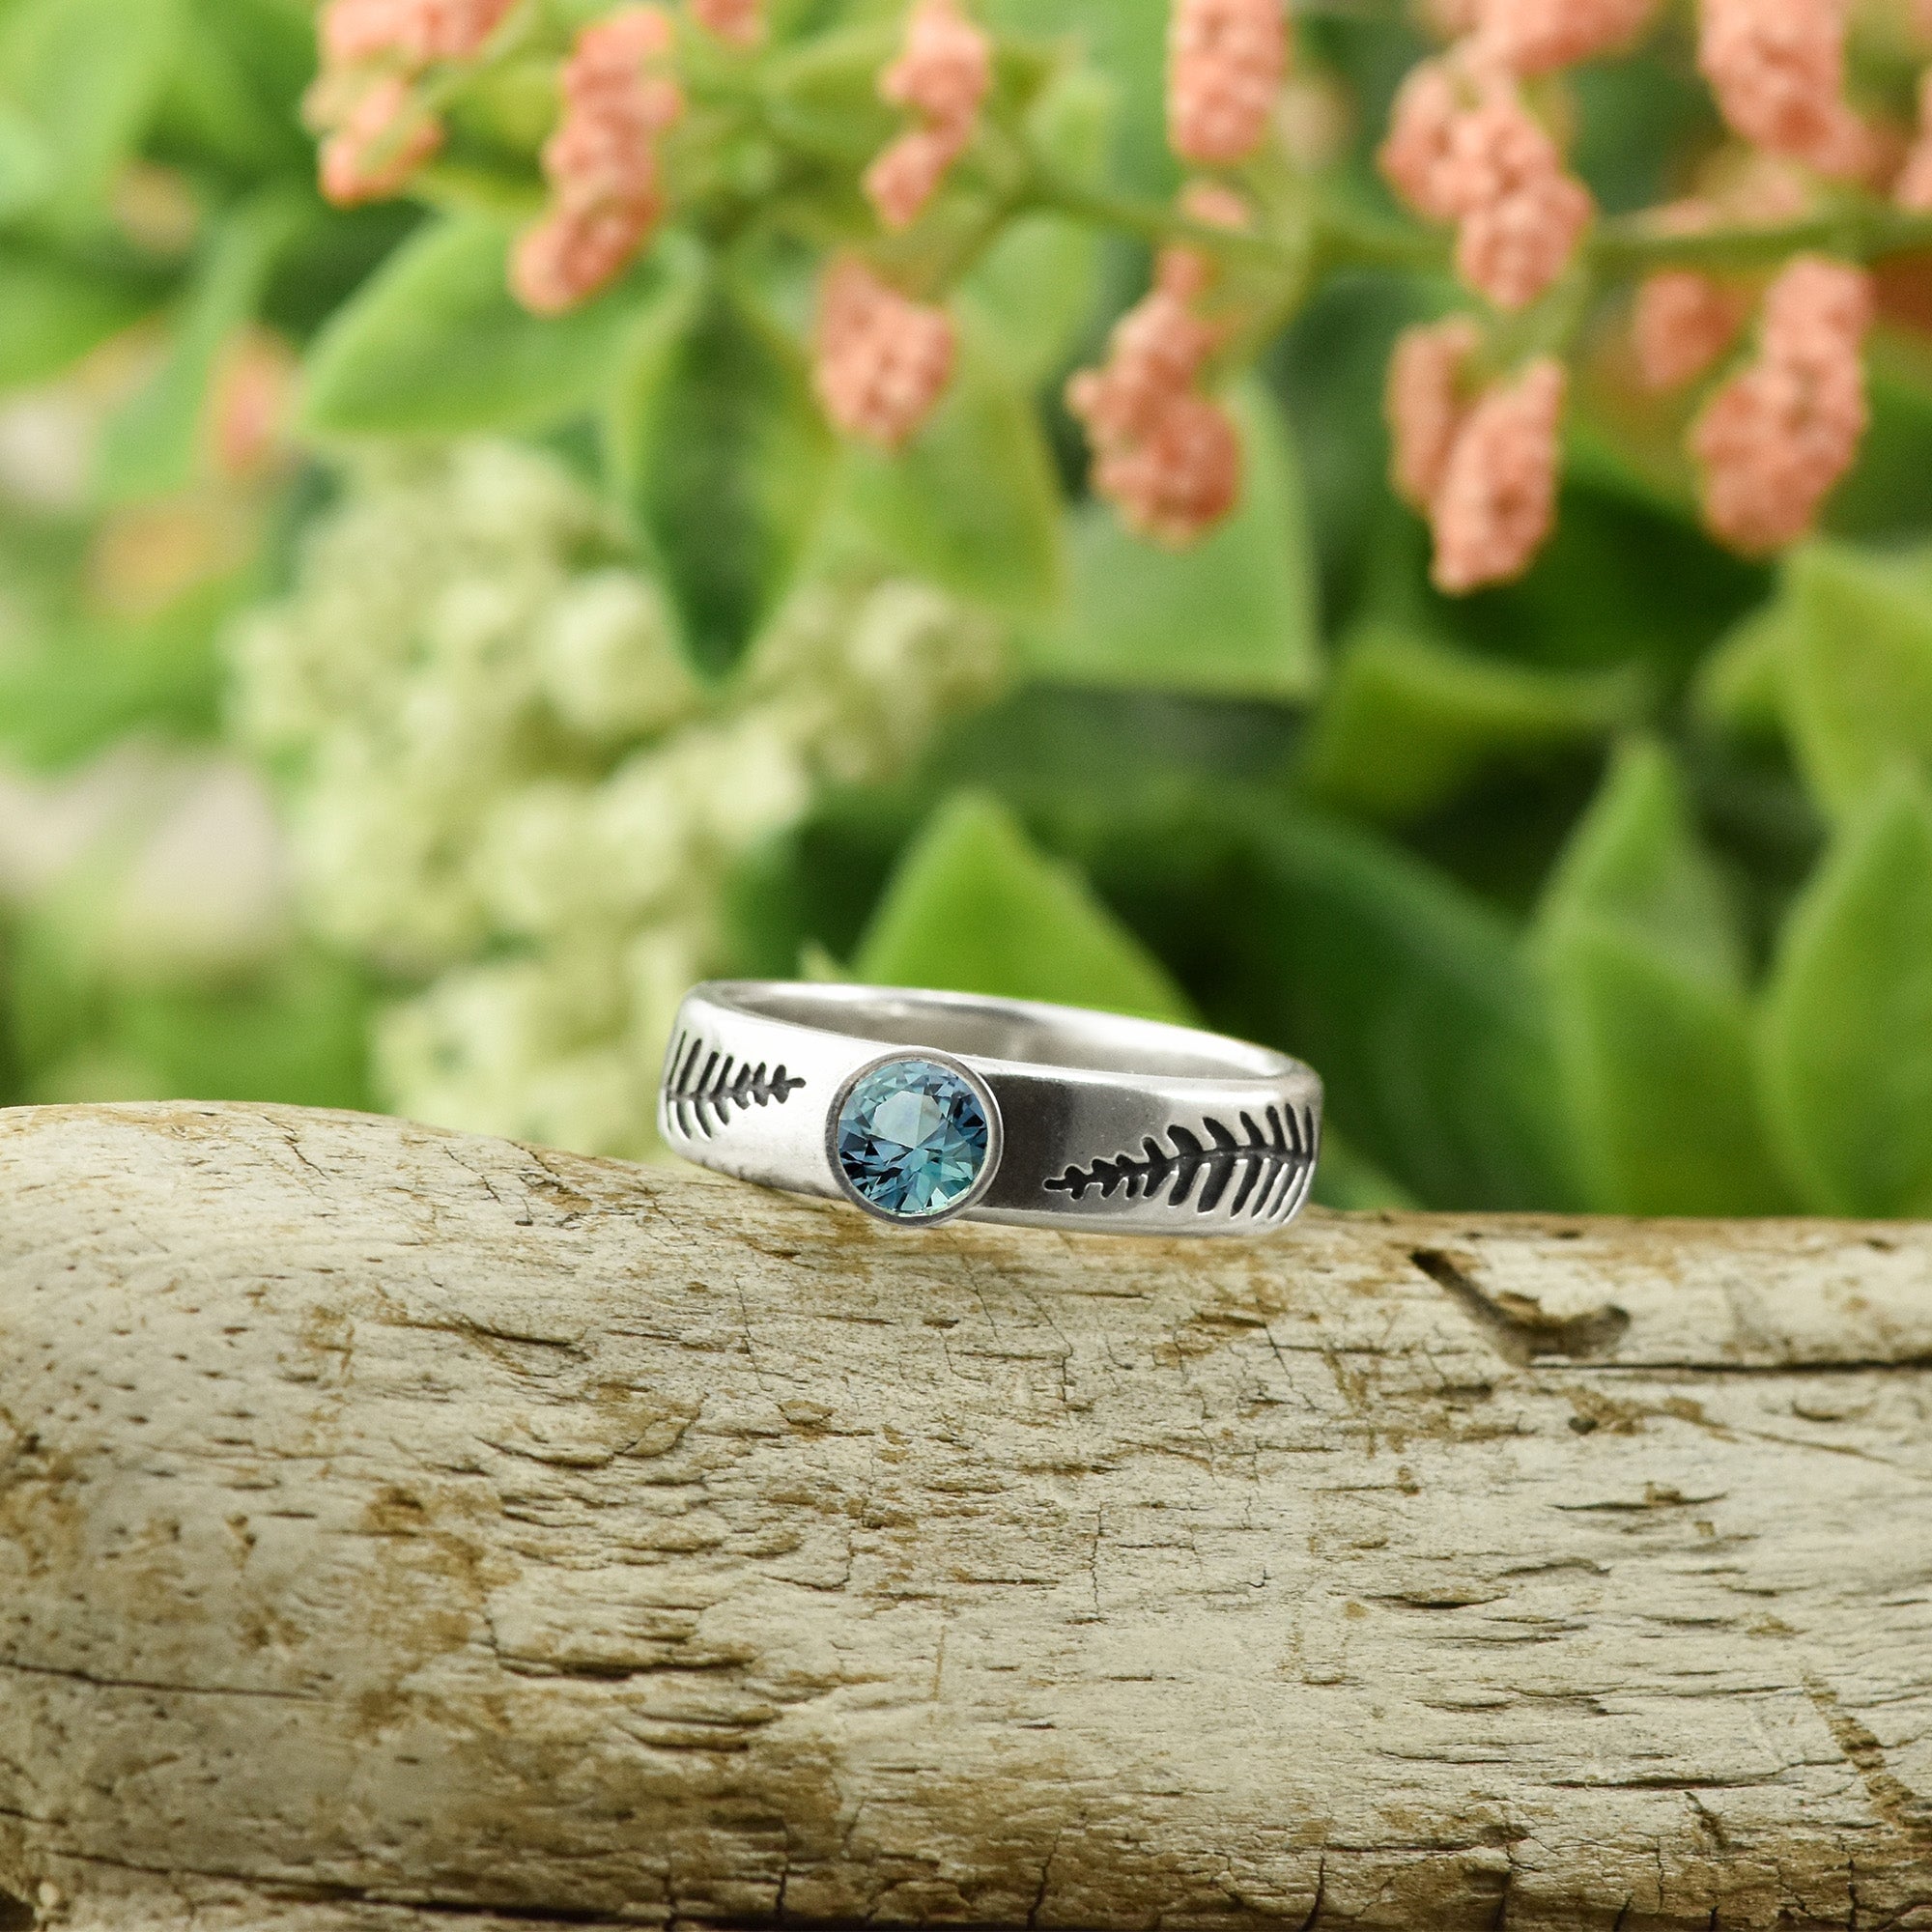 Mako Mermaids Moon Ring Review and Where to Buy 